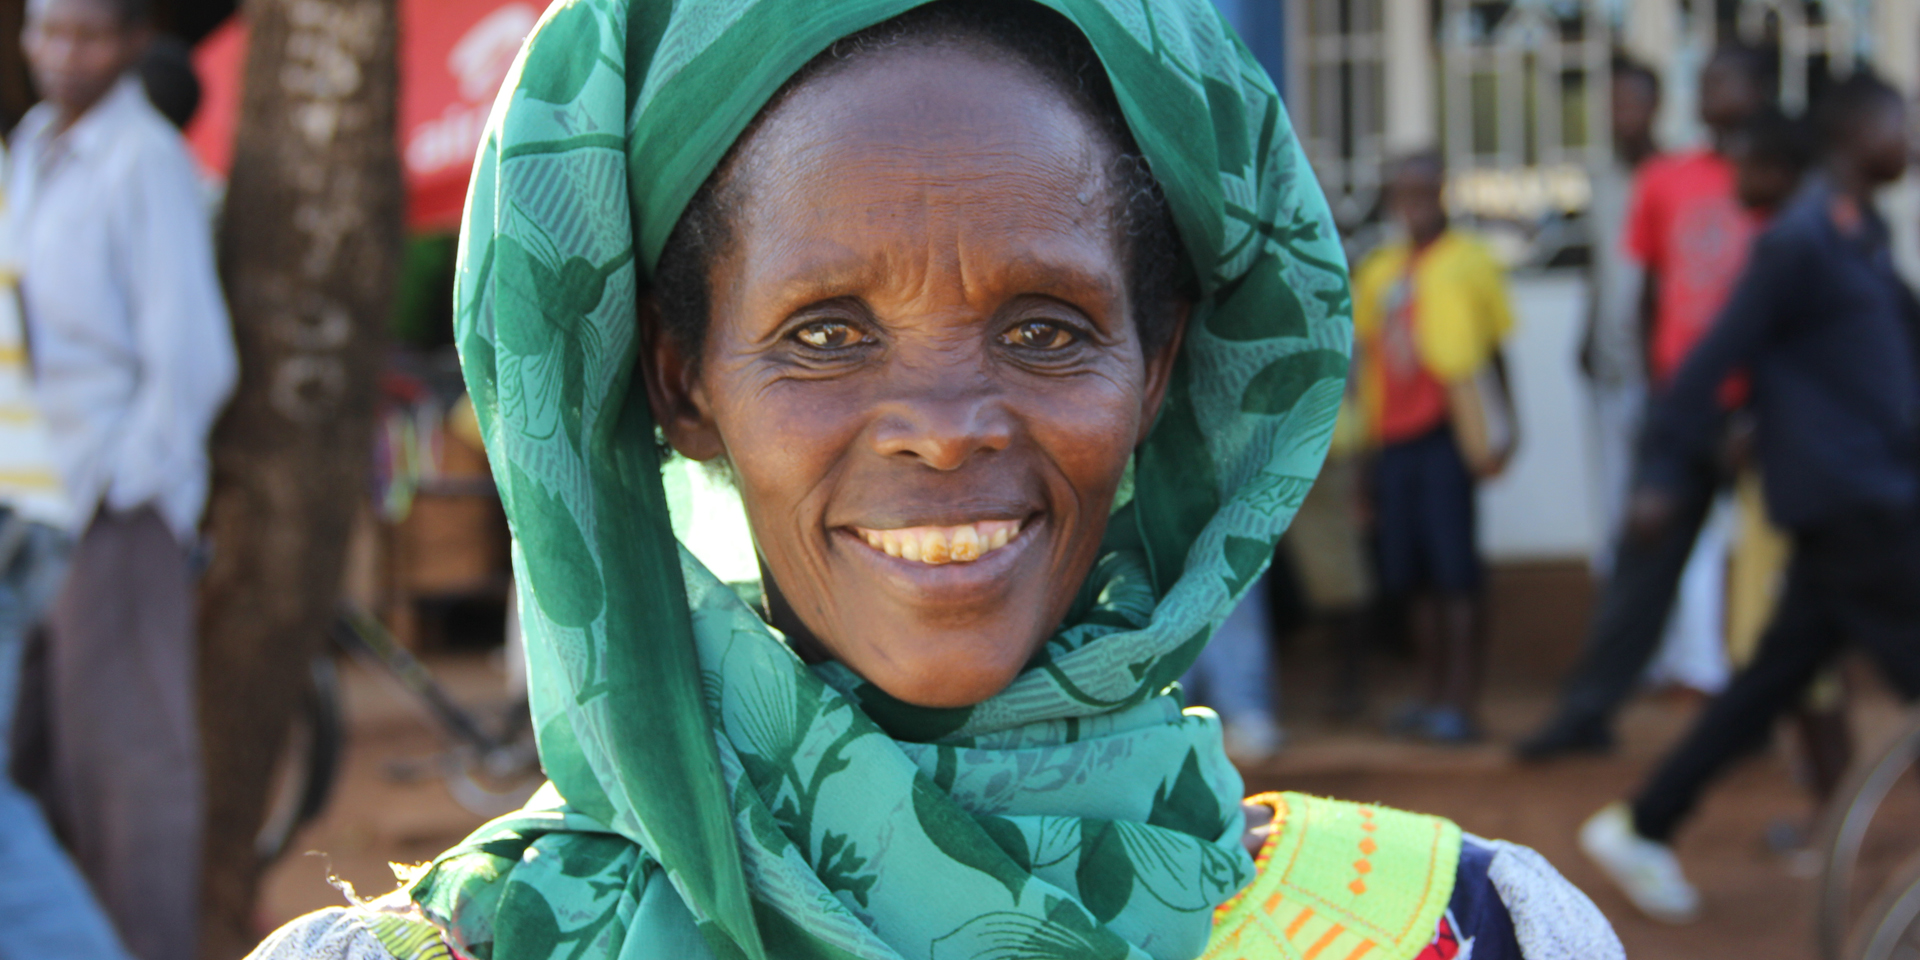 Image of a smiling woman standing on a busy street.